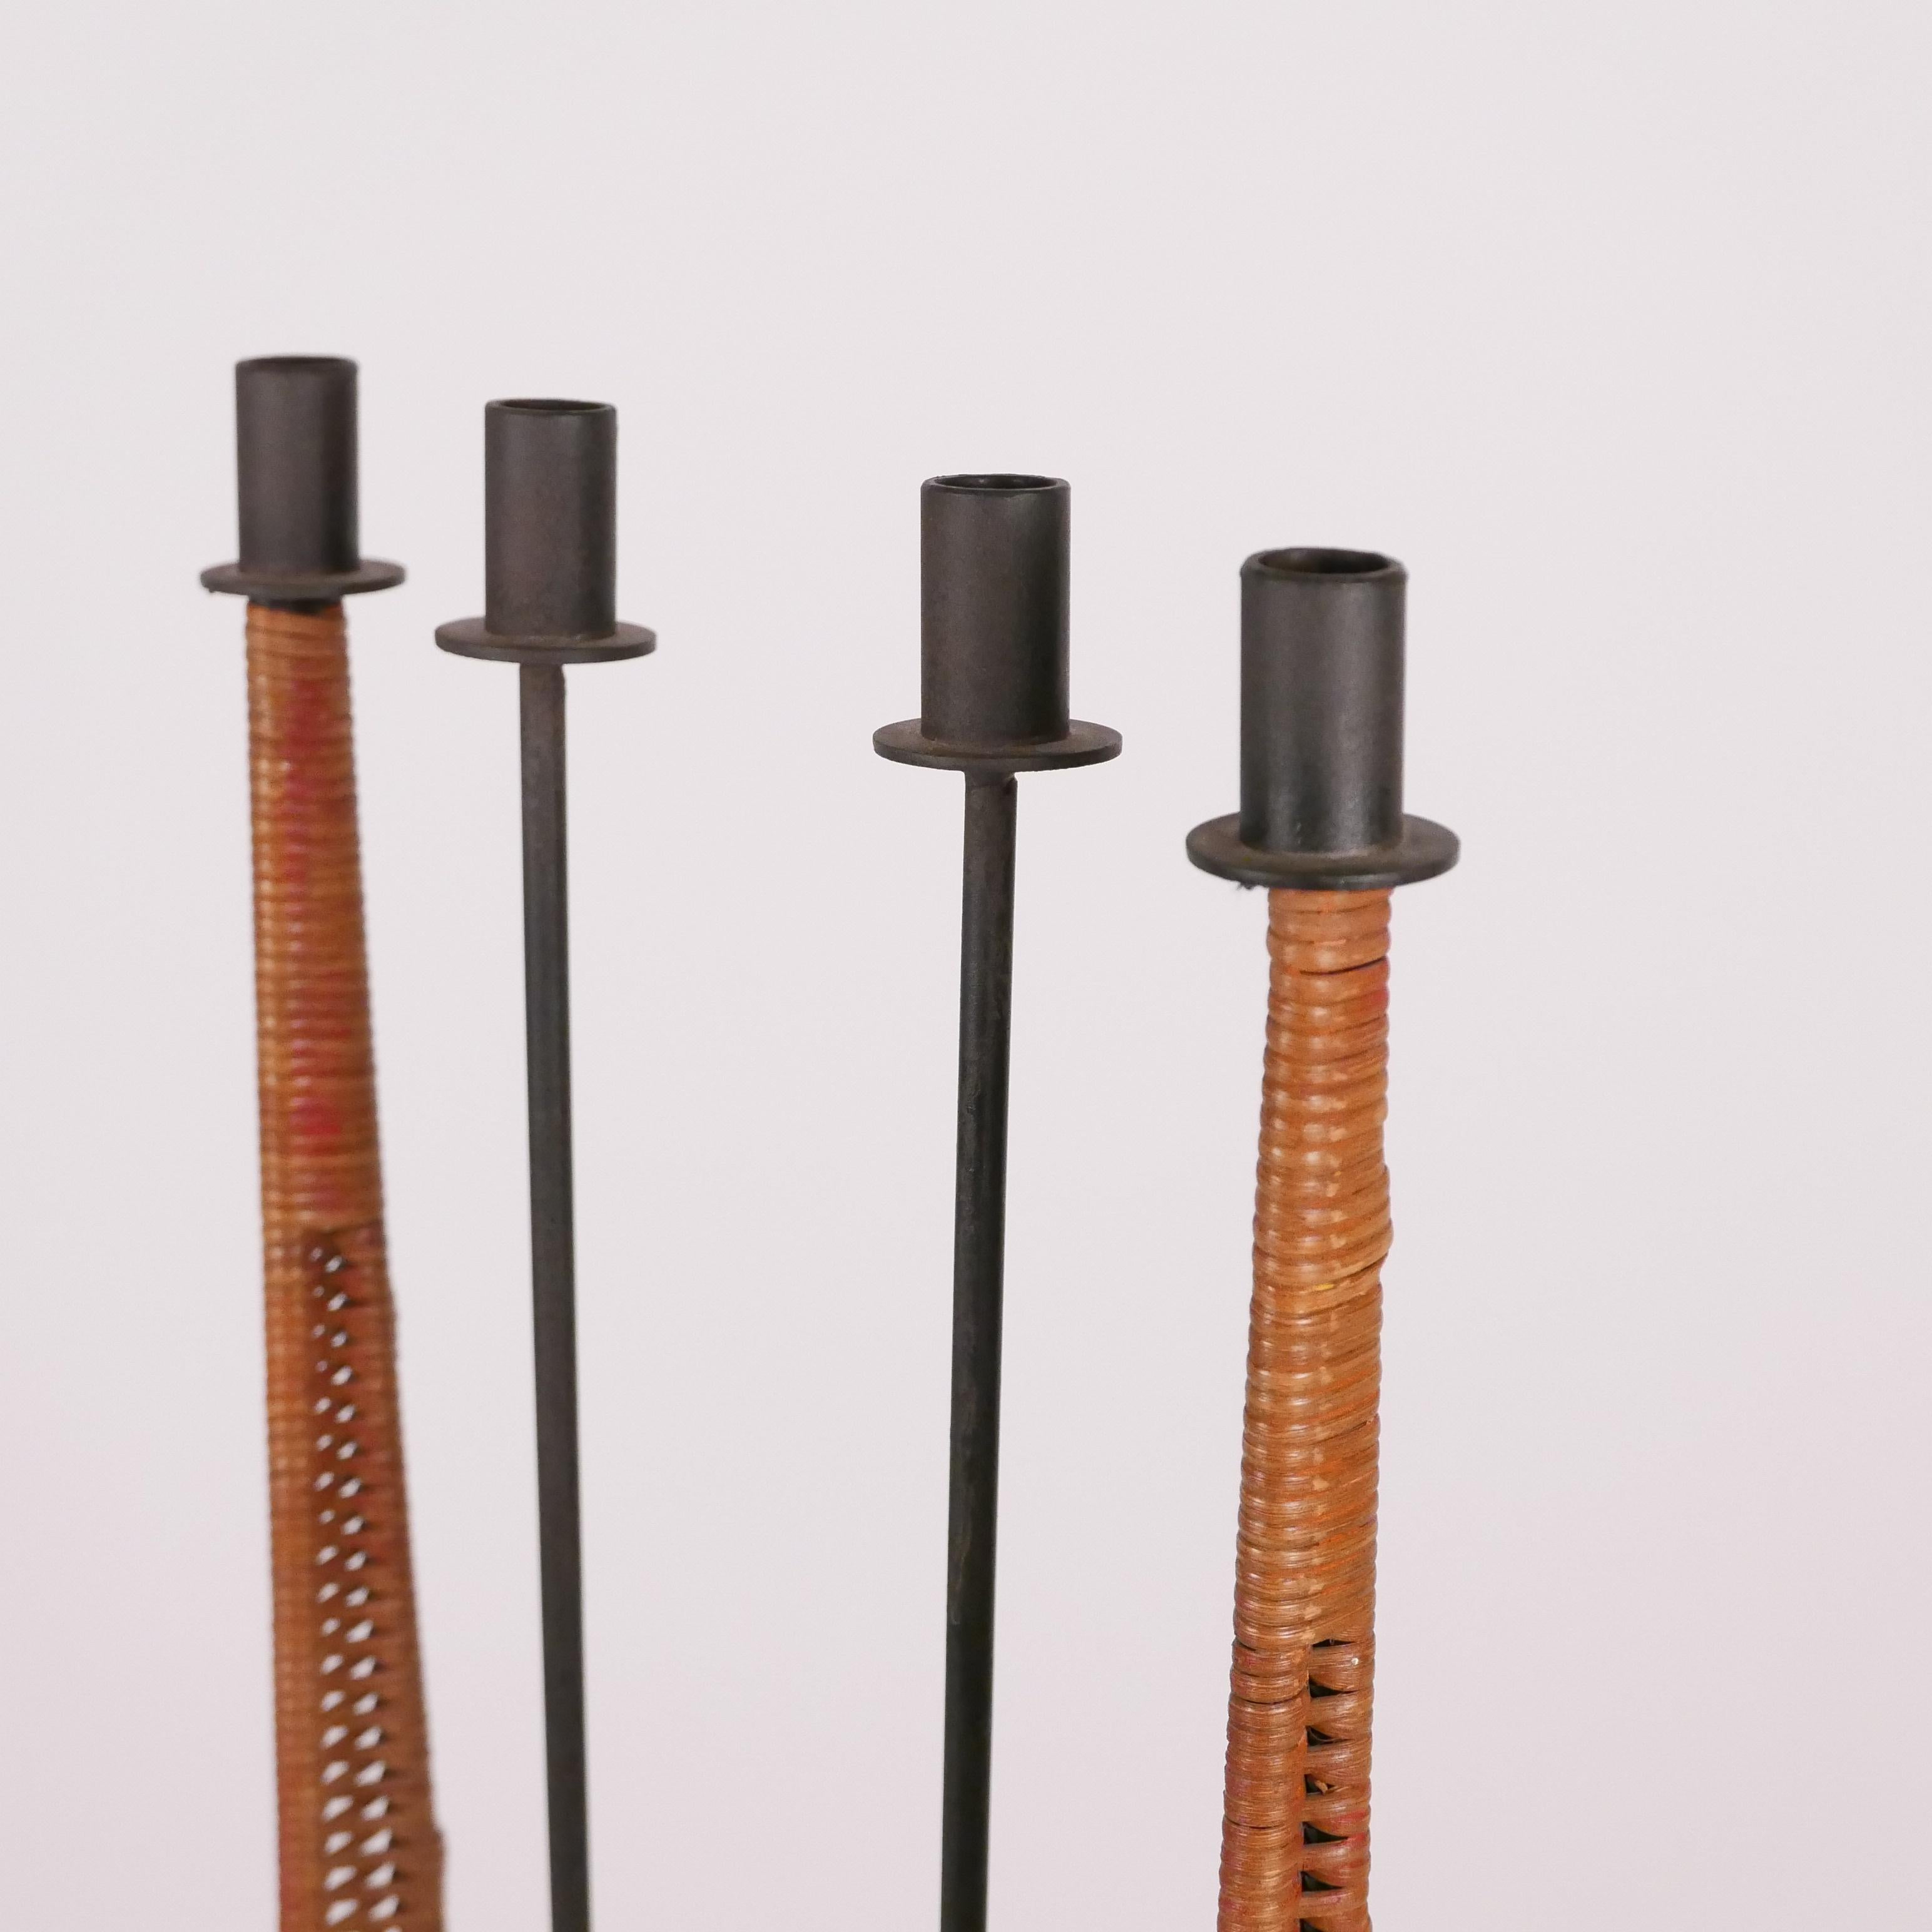 20th Century Wrought Iron and Cane Mid-Century Modern Candelabra Torchère by Arthur Umanoff